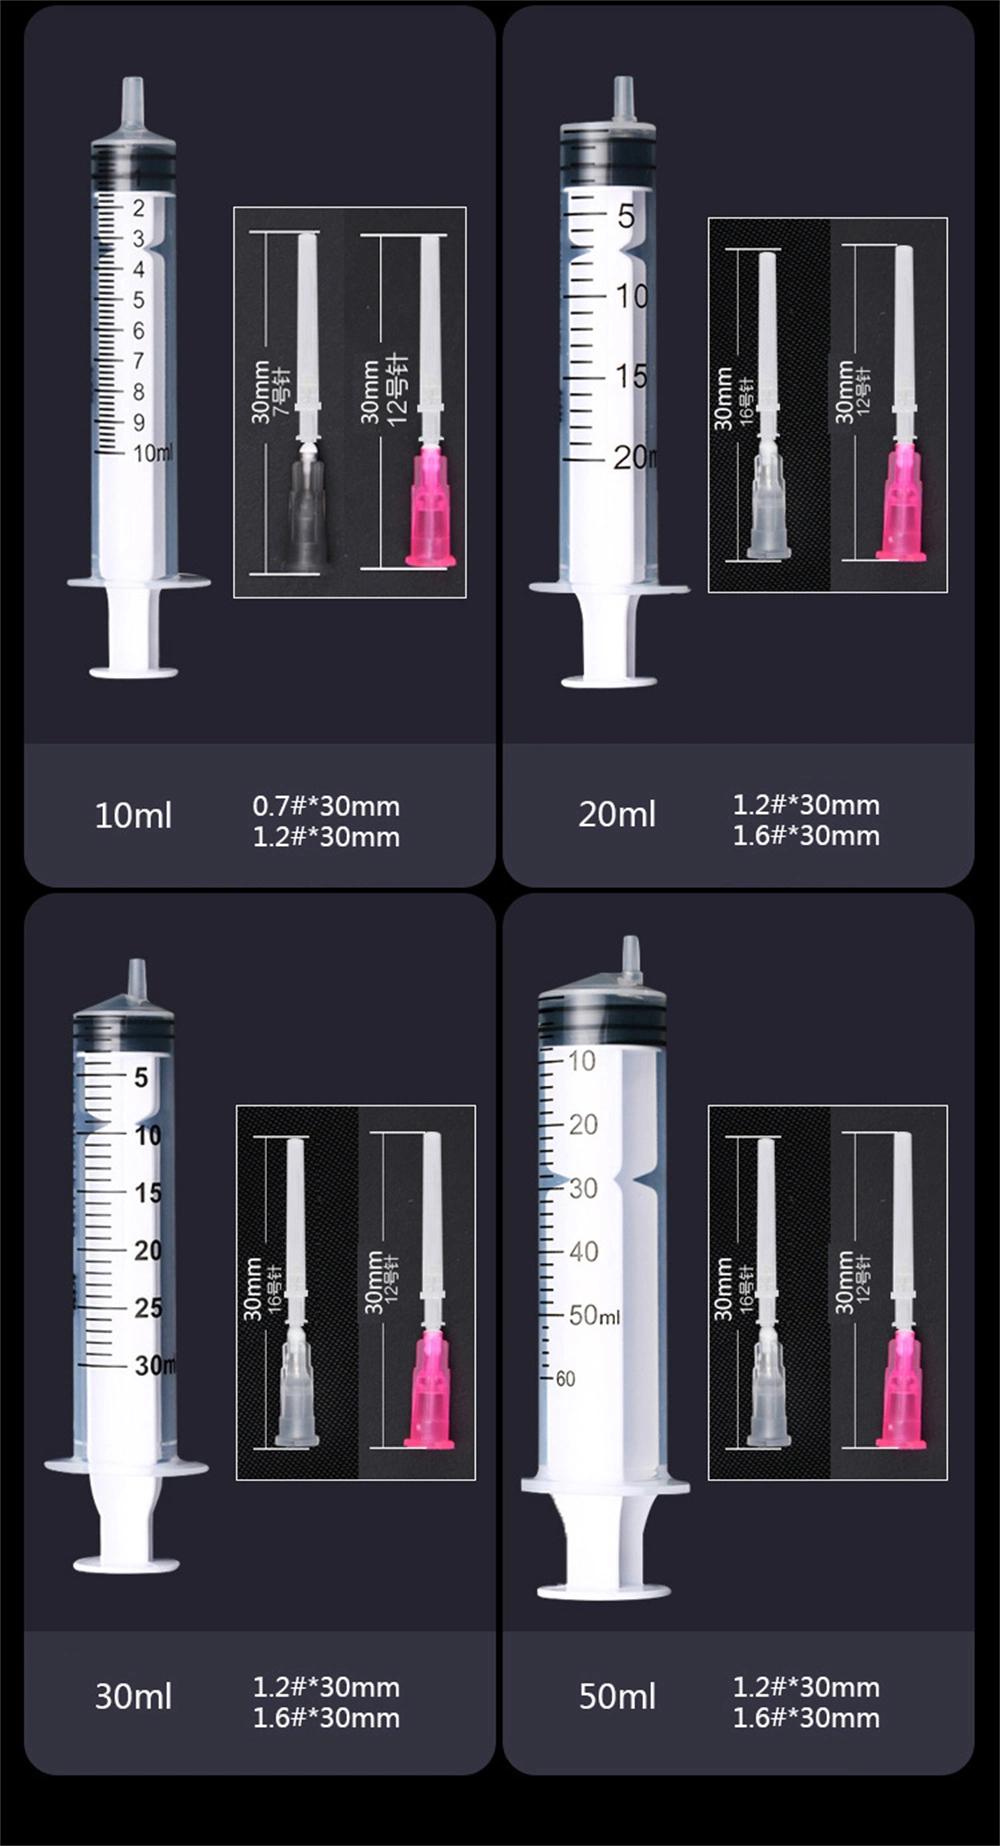 Plastic Syringe for Scientific Labs and Dispensing Multiple Uses Measuring Syringe Tools